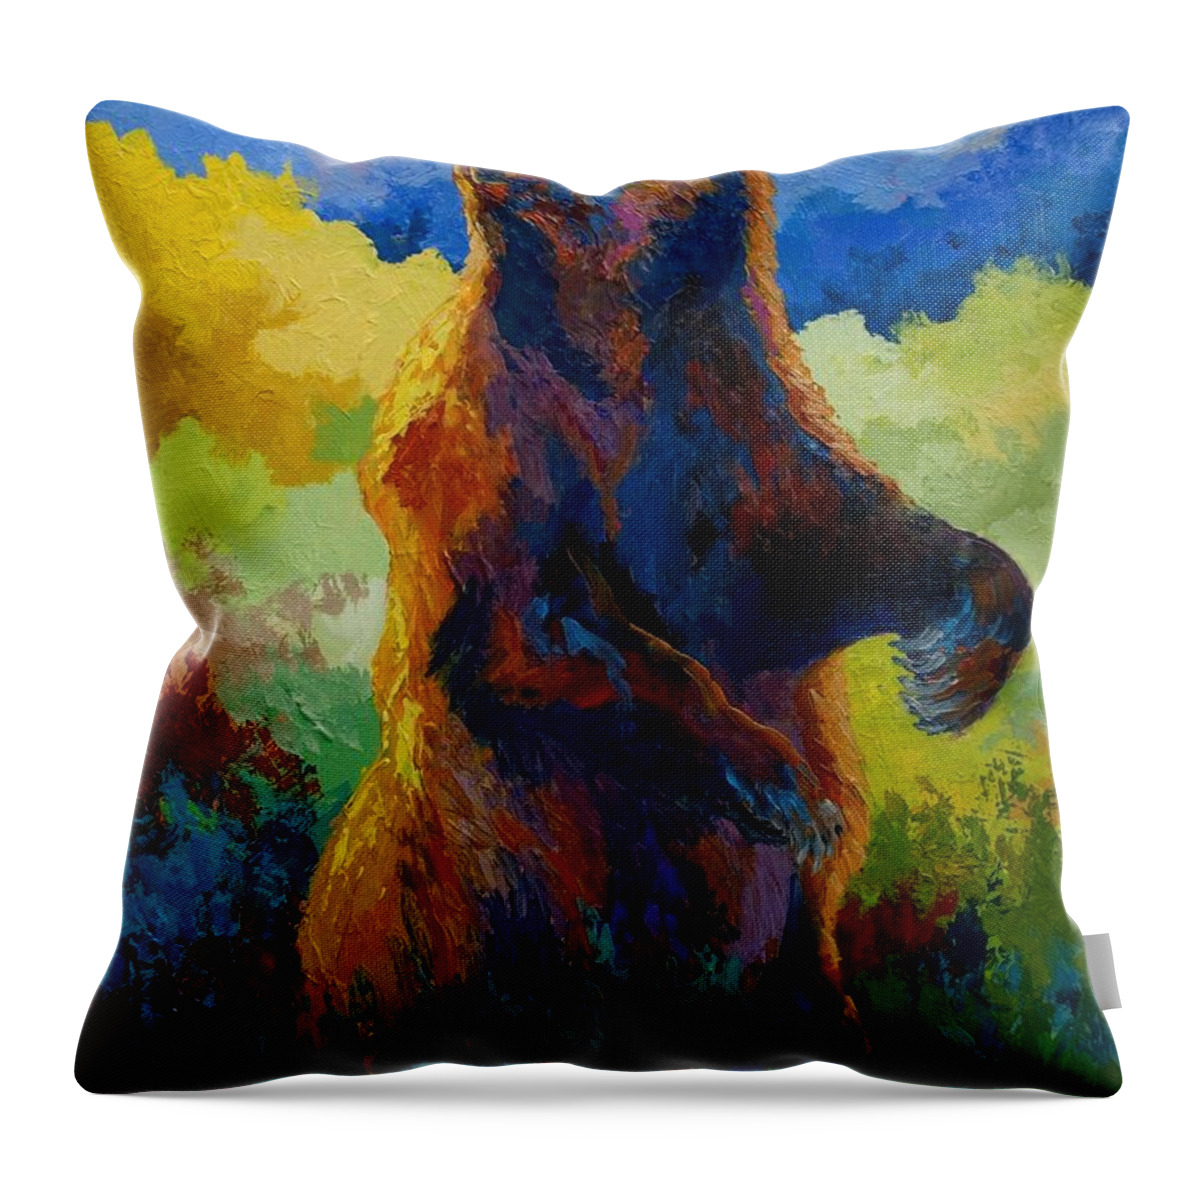 Bear Throw Pillow featuring the painting I Spy - Grizzly Bear by Marion Rose